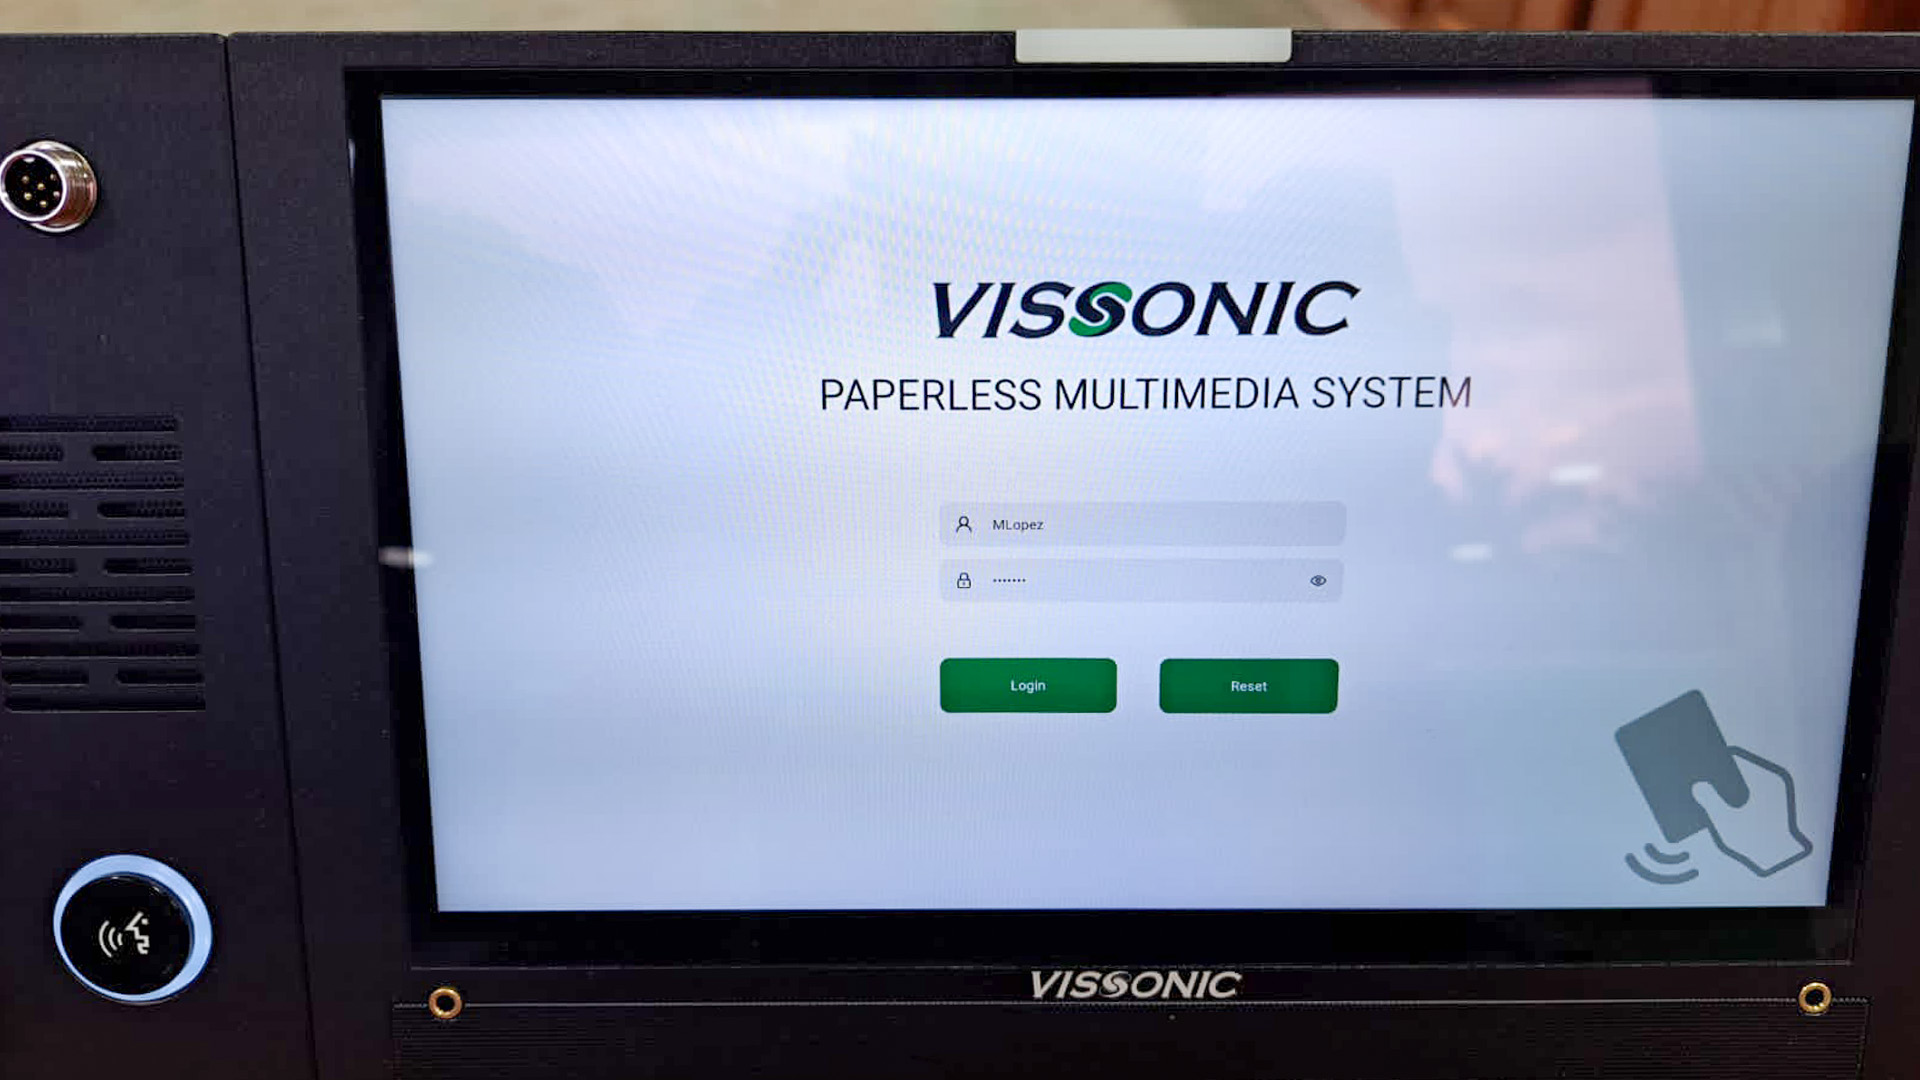 VISSONIC Modular Paperless Conference System in Costa Rica